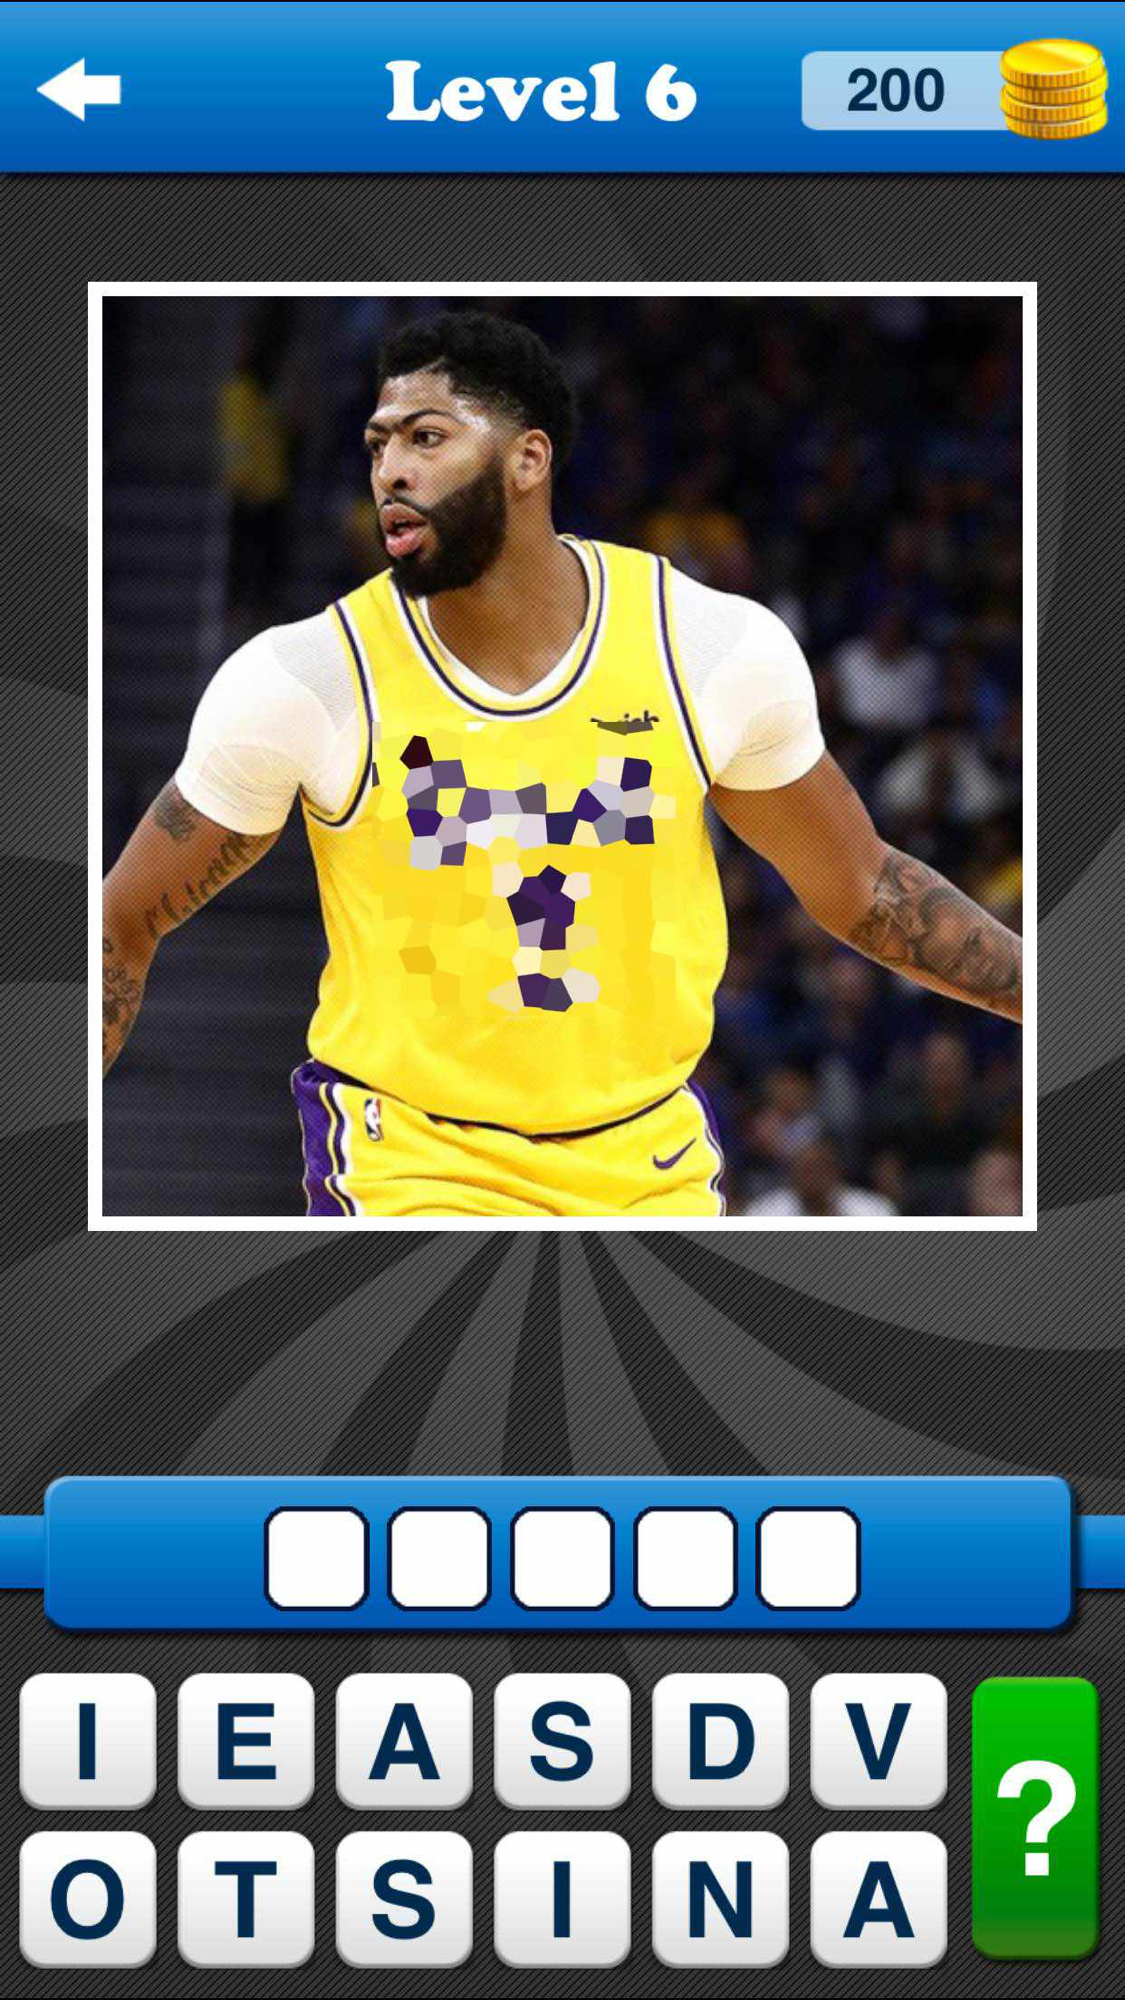 Whos the Player Basketball App  Featured Image for Version 